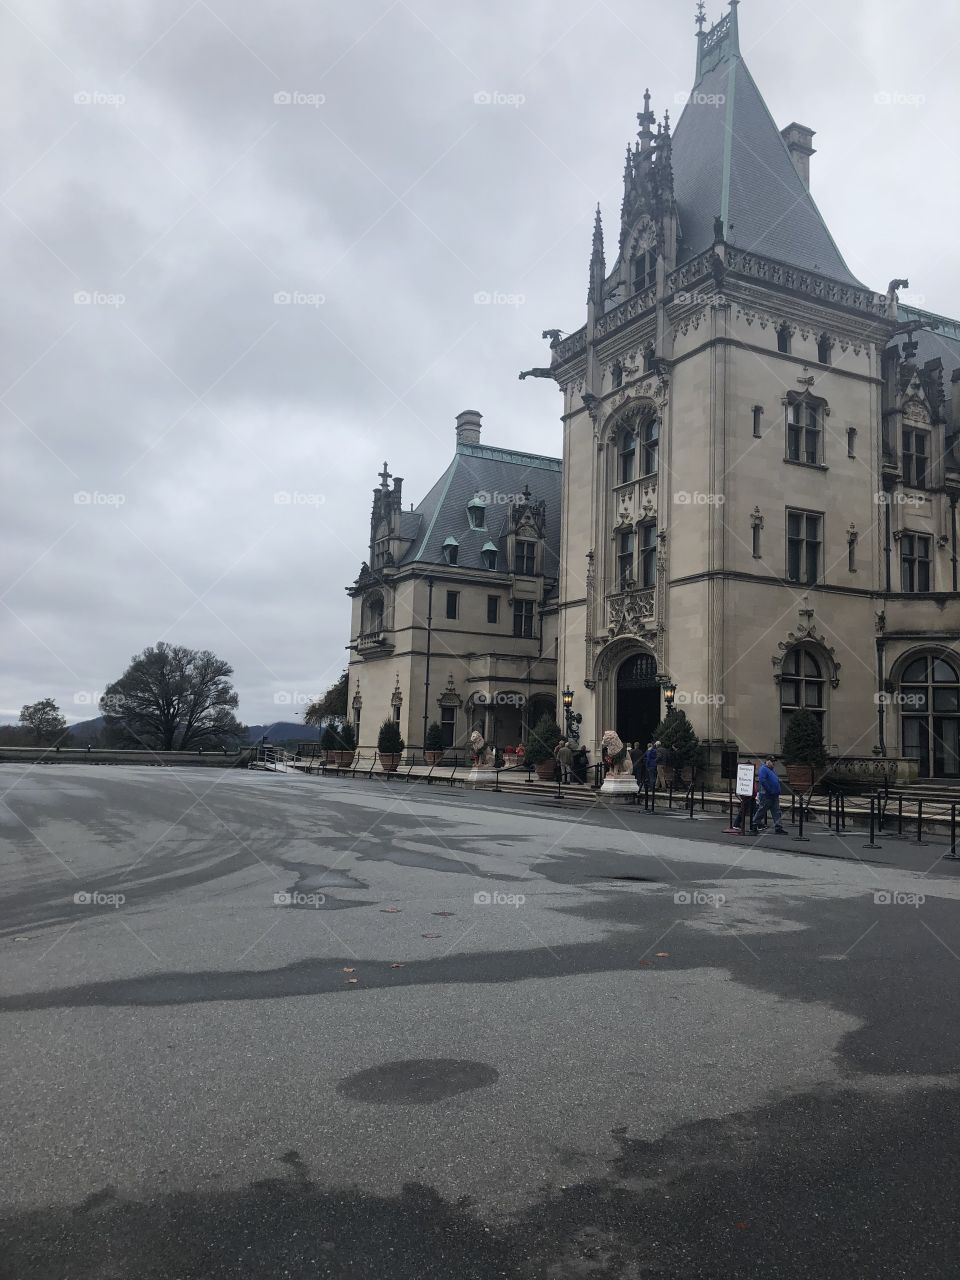 Biltmore entrance on a rainy day